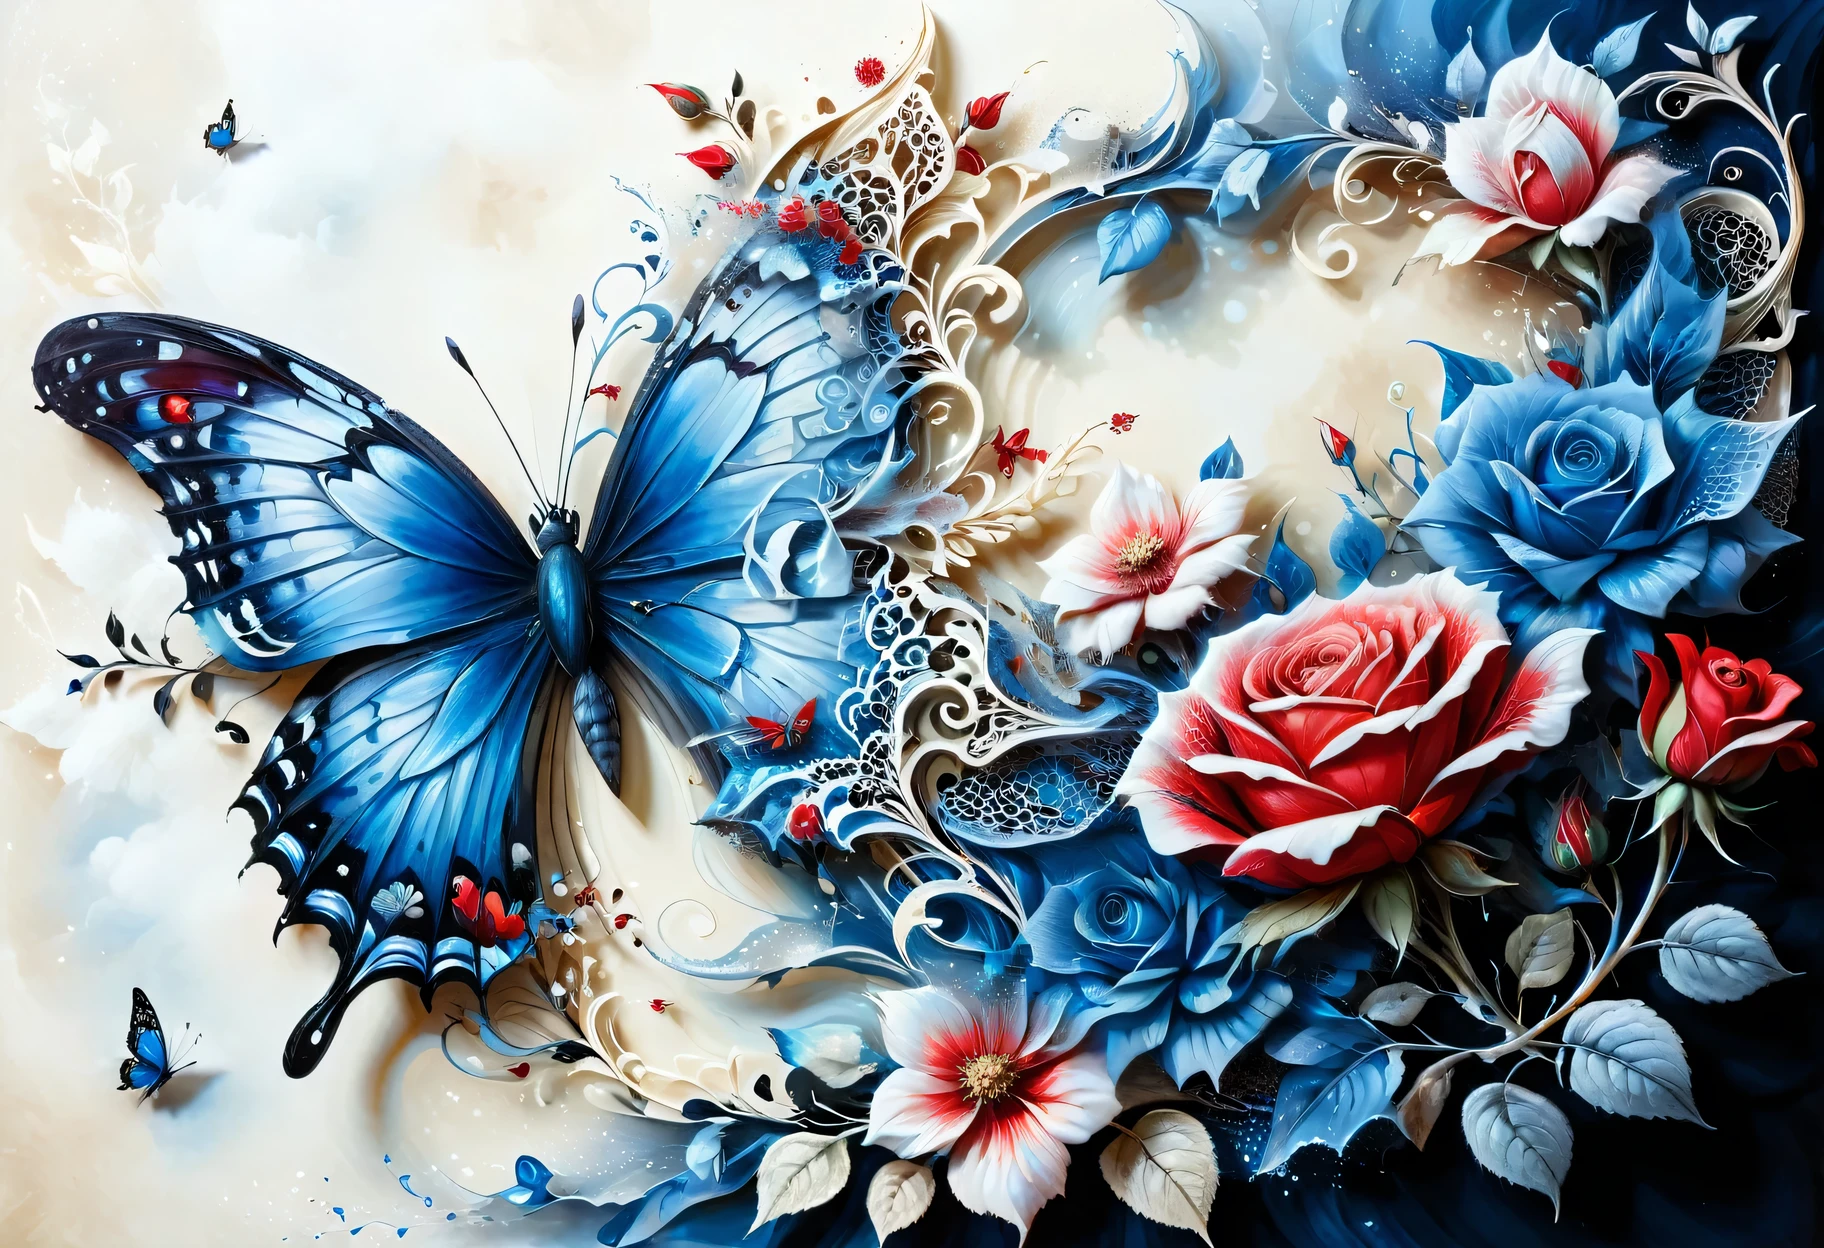 A two-layer painting with the effect of surreal volume by superimposing layers in different styles, a surreal grotesque image ((blue butterfly)) and (red rose flower) on one layer, surrounded by an elegant edging with an intricate pattern made by the second layer, the combination of two layers creates the illusion of volume, canvas, acrylic, transparency, filigree, clarity